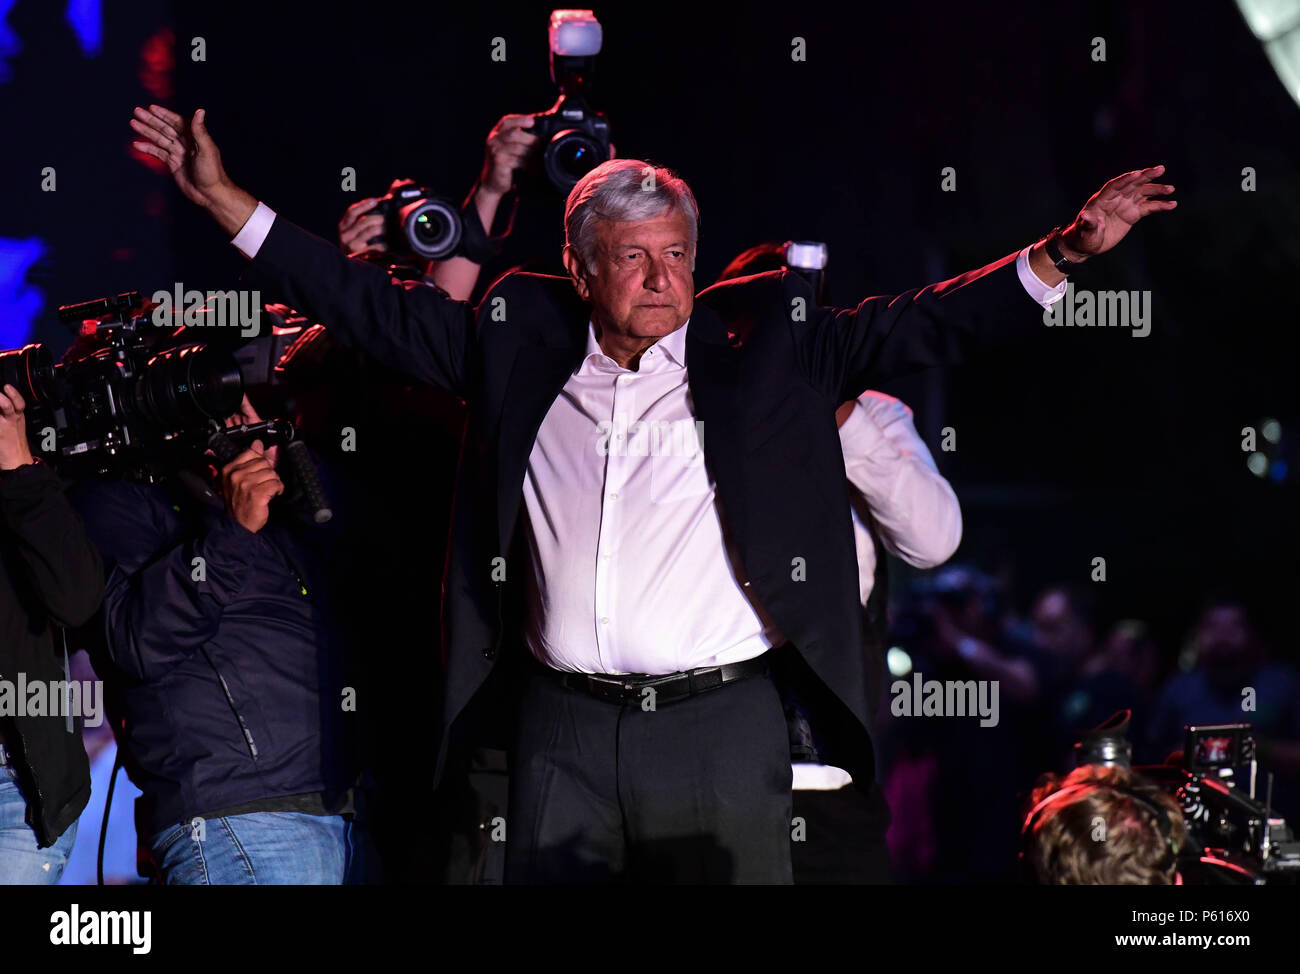 Mexico, Ciudad de Mexico, Mexico. 27th June, 2018. Presidential candidate Manuel Lopez Obrador speaks at his closing rally at the Azteca stadium in Mexico City Wednesday, ahead of presidential elections on July 1. Obrador leads on the presidential race by 20 points. Credit: Miguel Juarez Lugo/ZUMA Wire/Alamy Live News Stock Photo